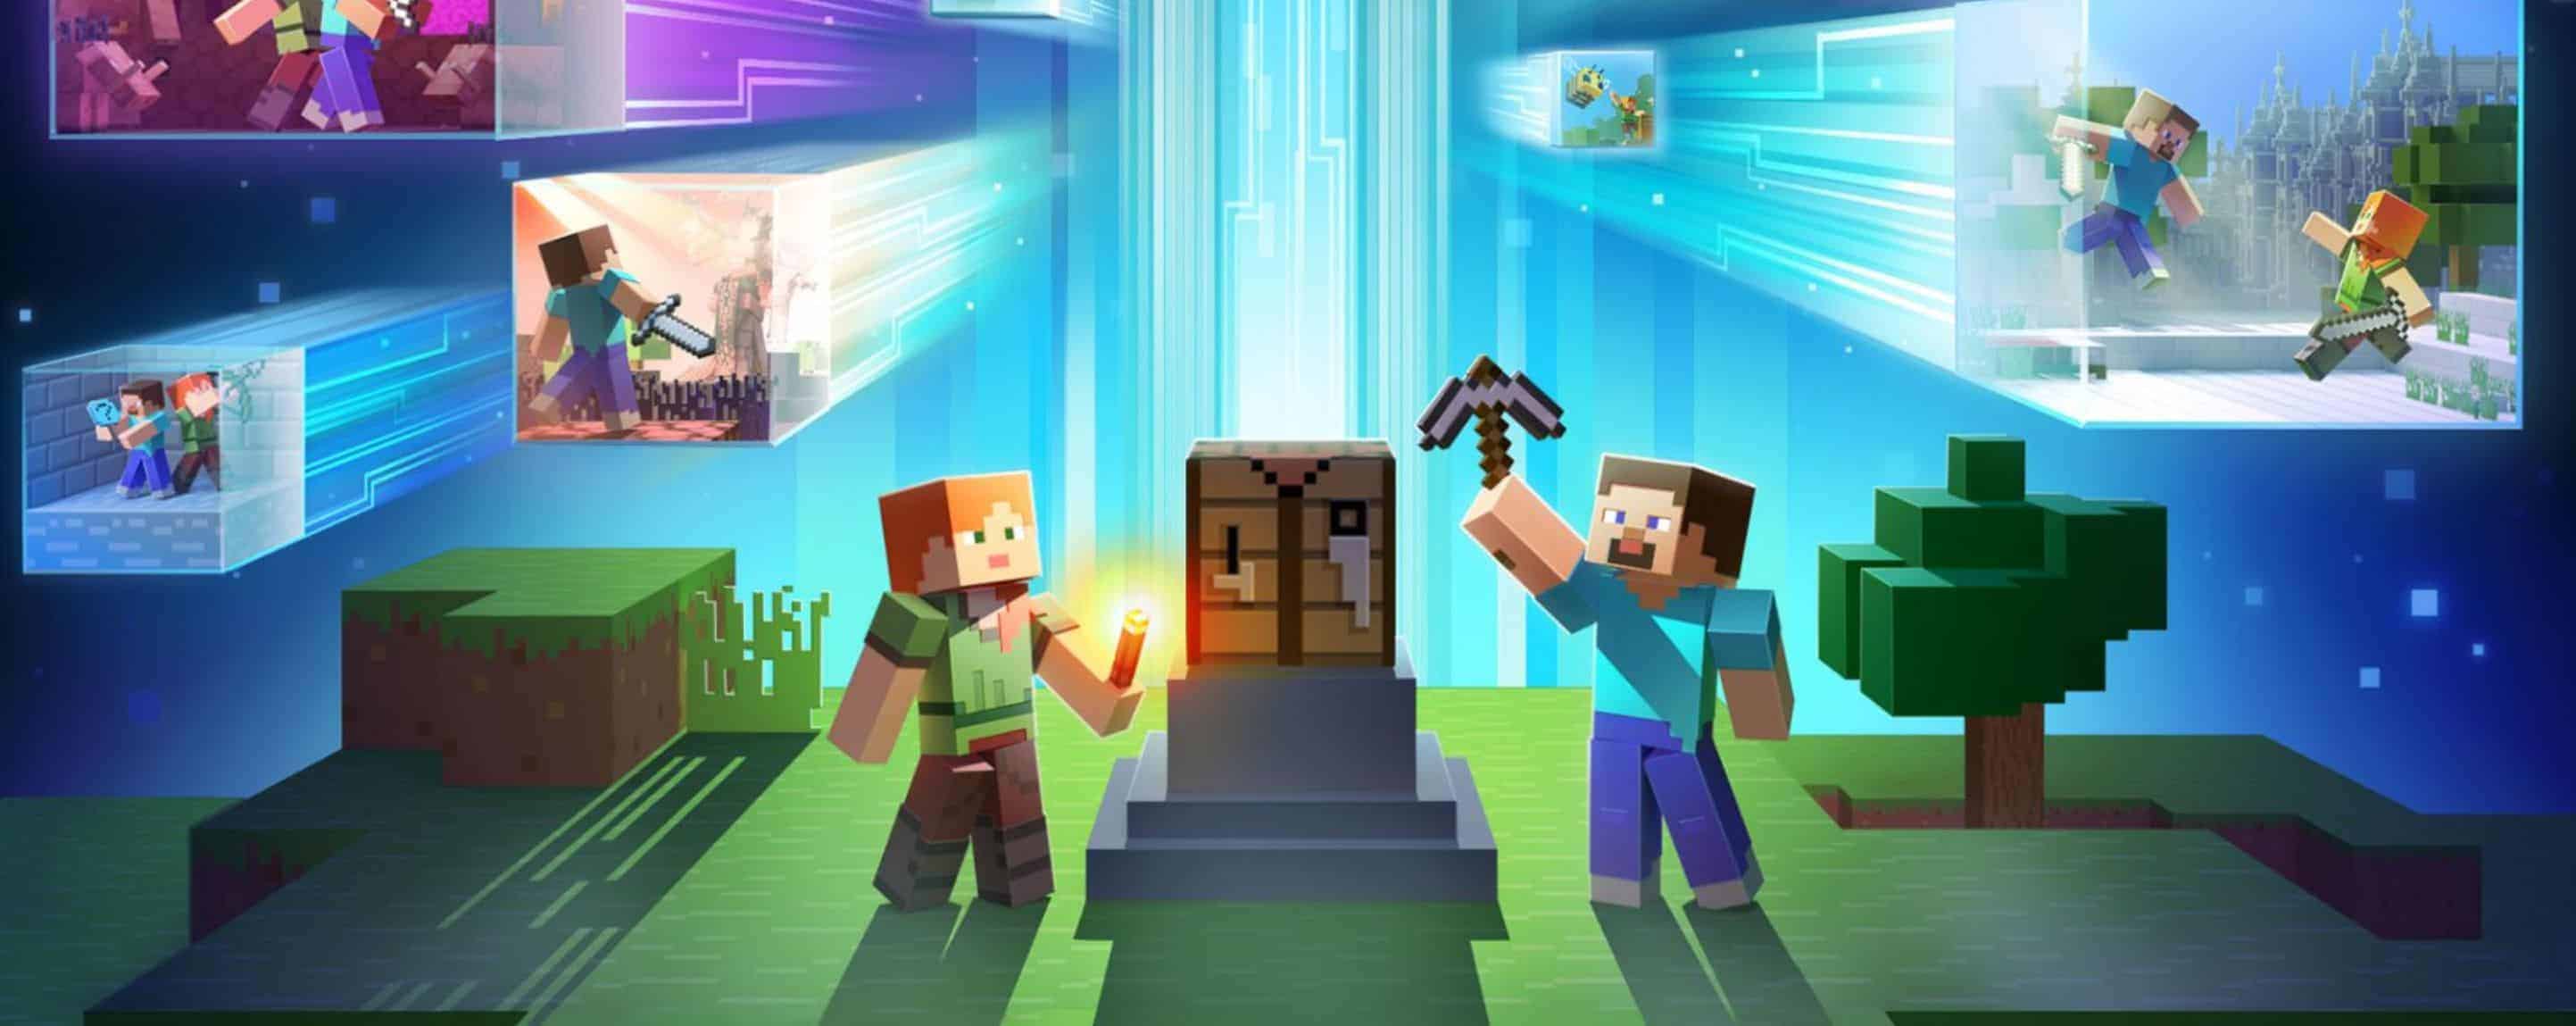 Download Minecraft MOD APK v1.11 (Story Mode Ⅱ) for Android